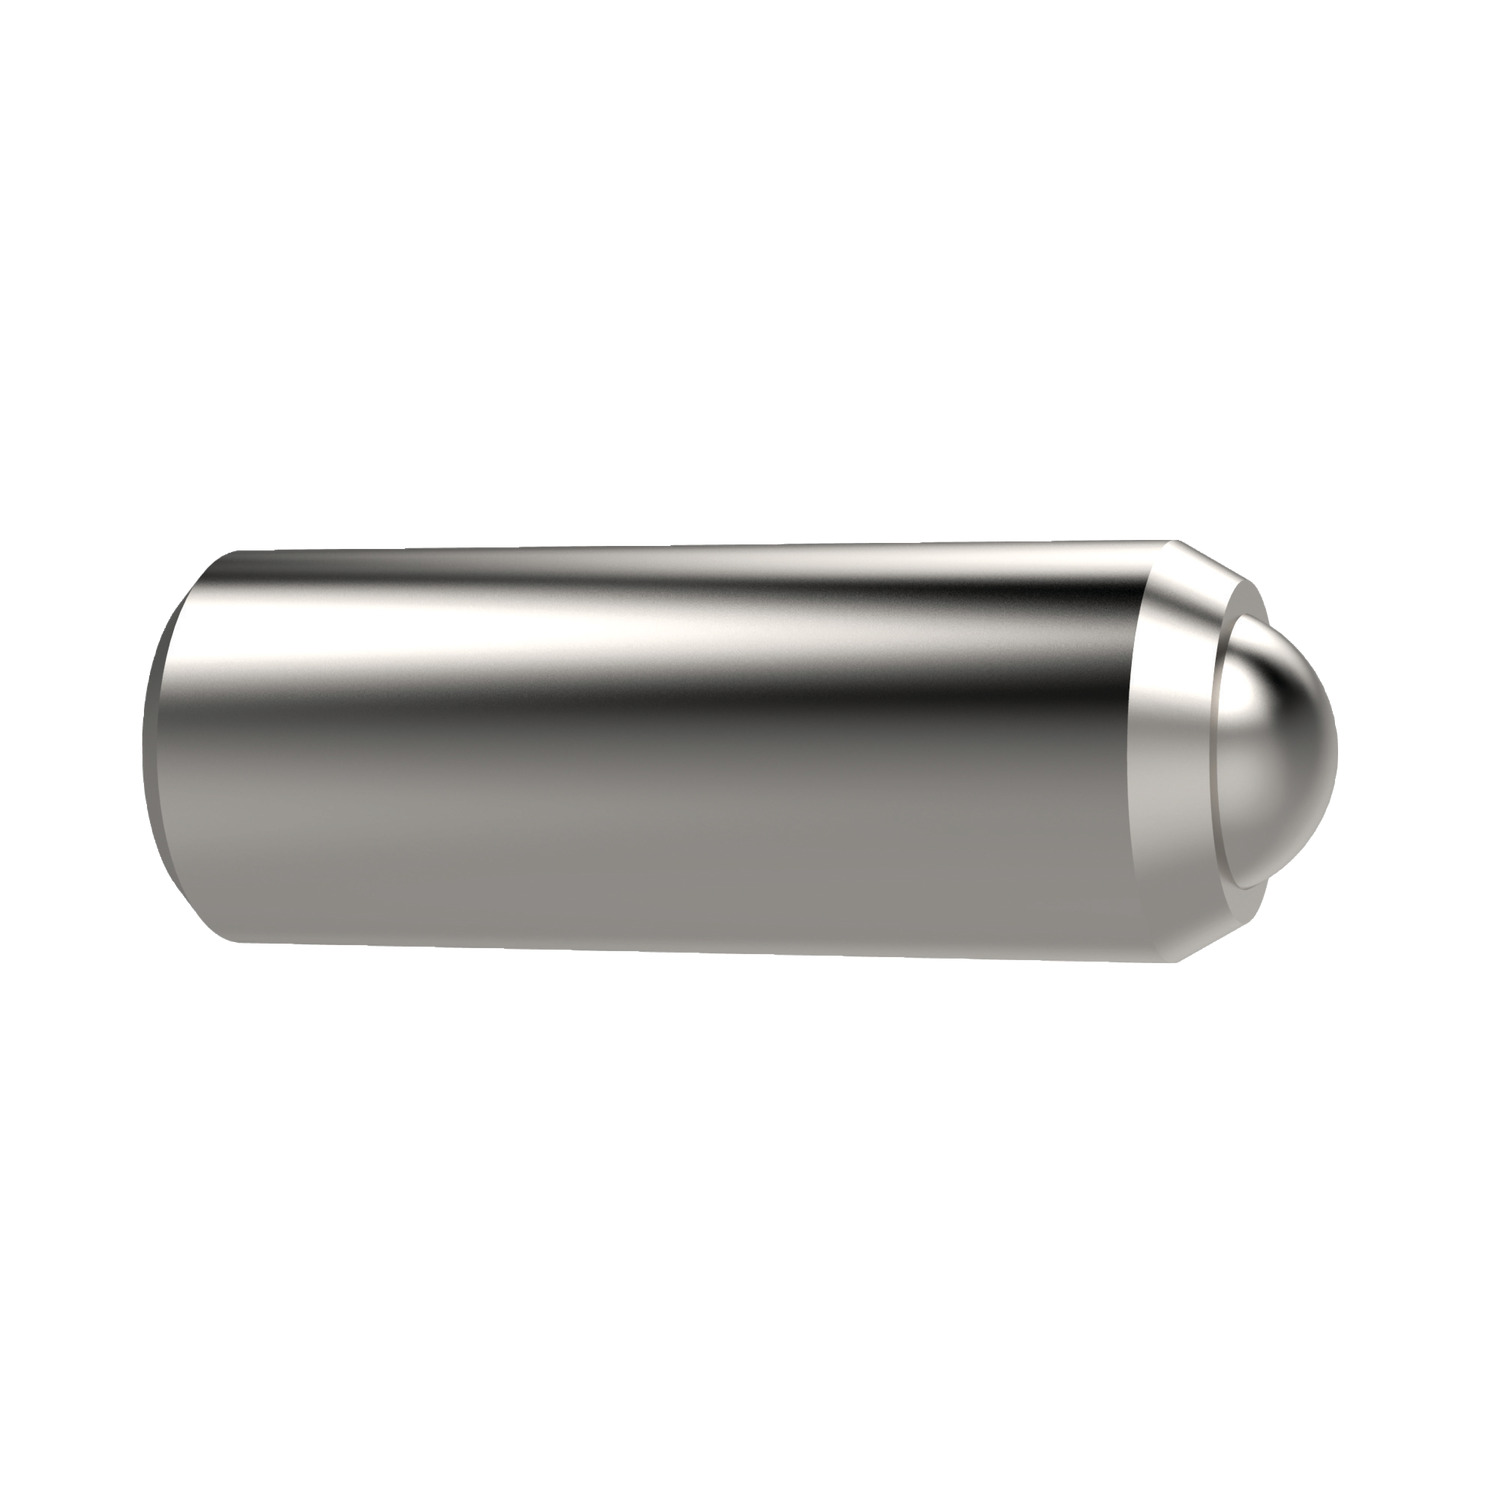 32280.W0370 Spring Plunger - Ball - Smooth Model All Stainless - 5,0 - 3,5 - 13,0 EC:20253103 WG:05063052078798